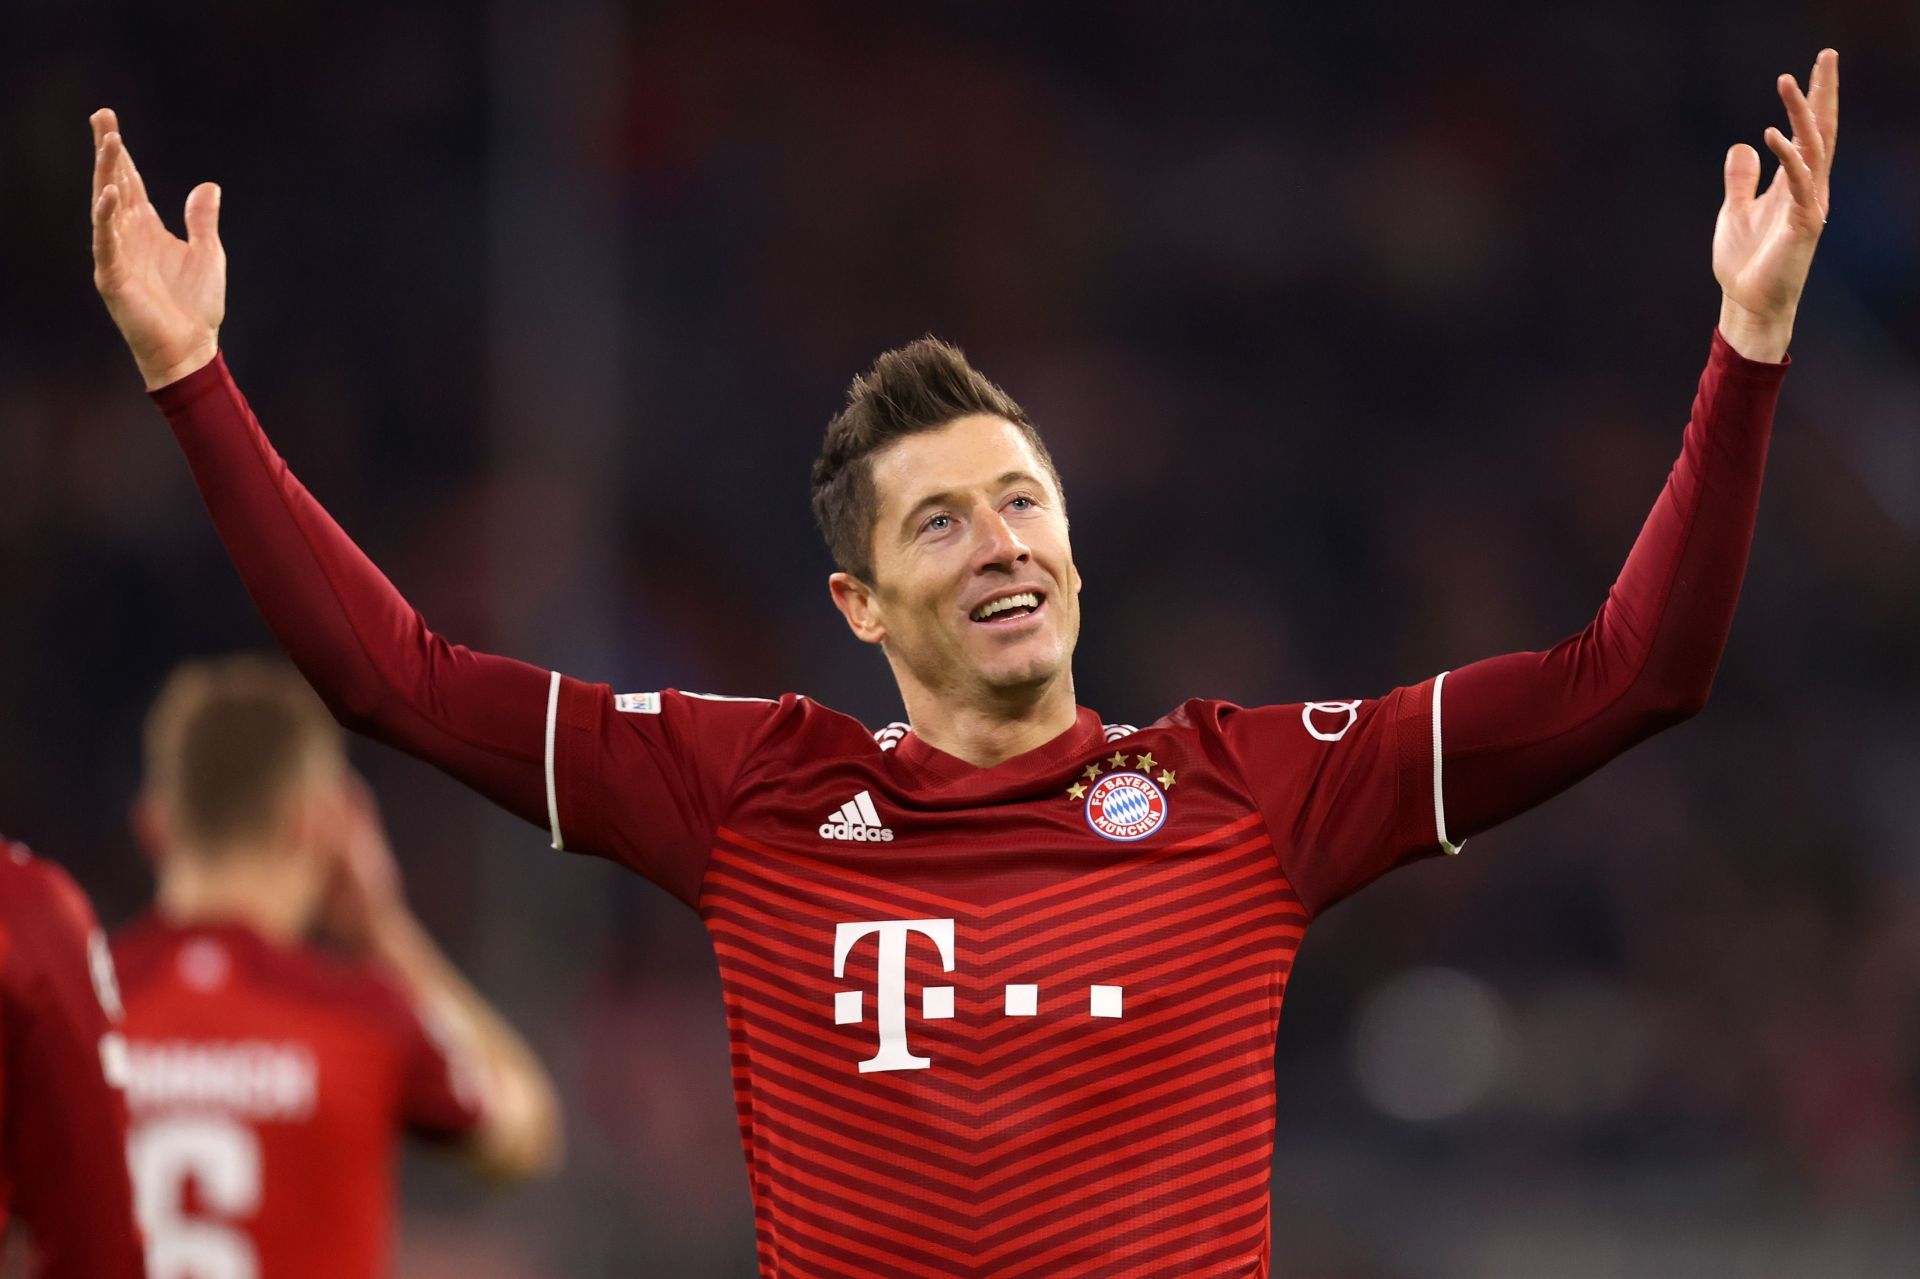 Robert Lewandowski is another star who made a move from Dortmund to Munich.